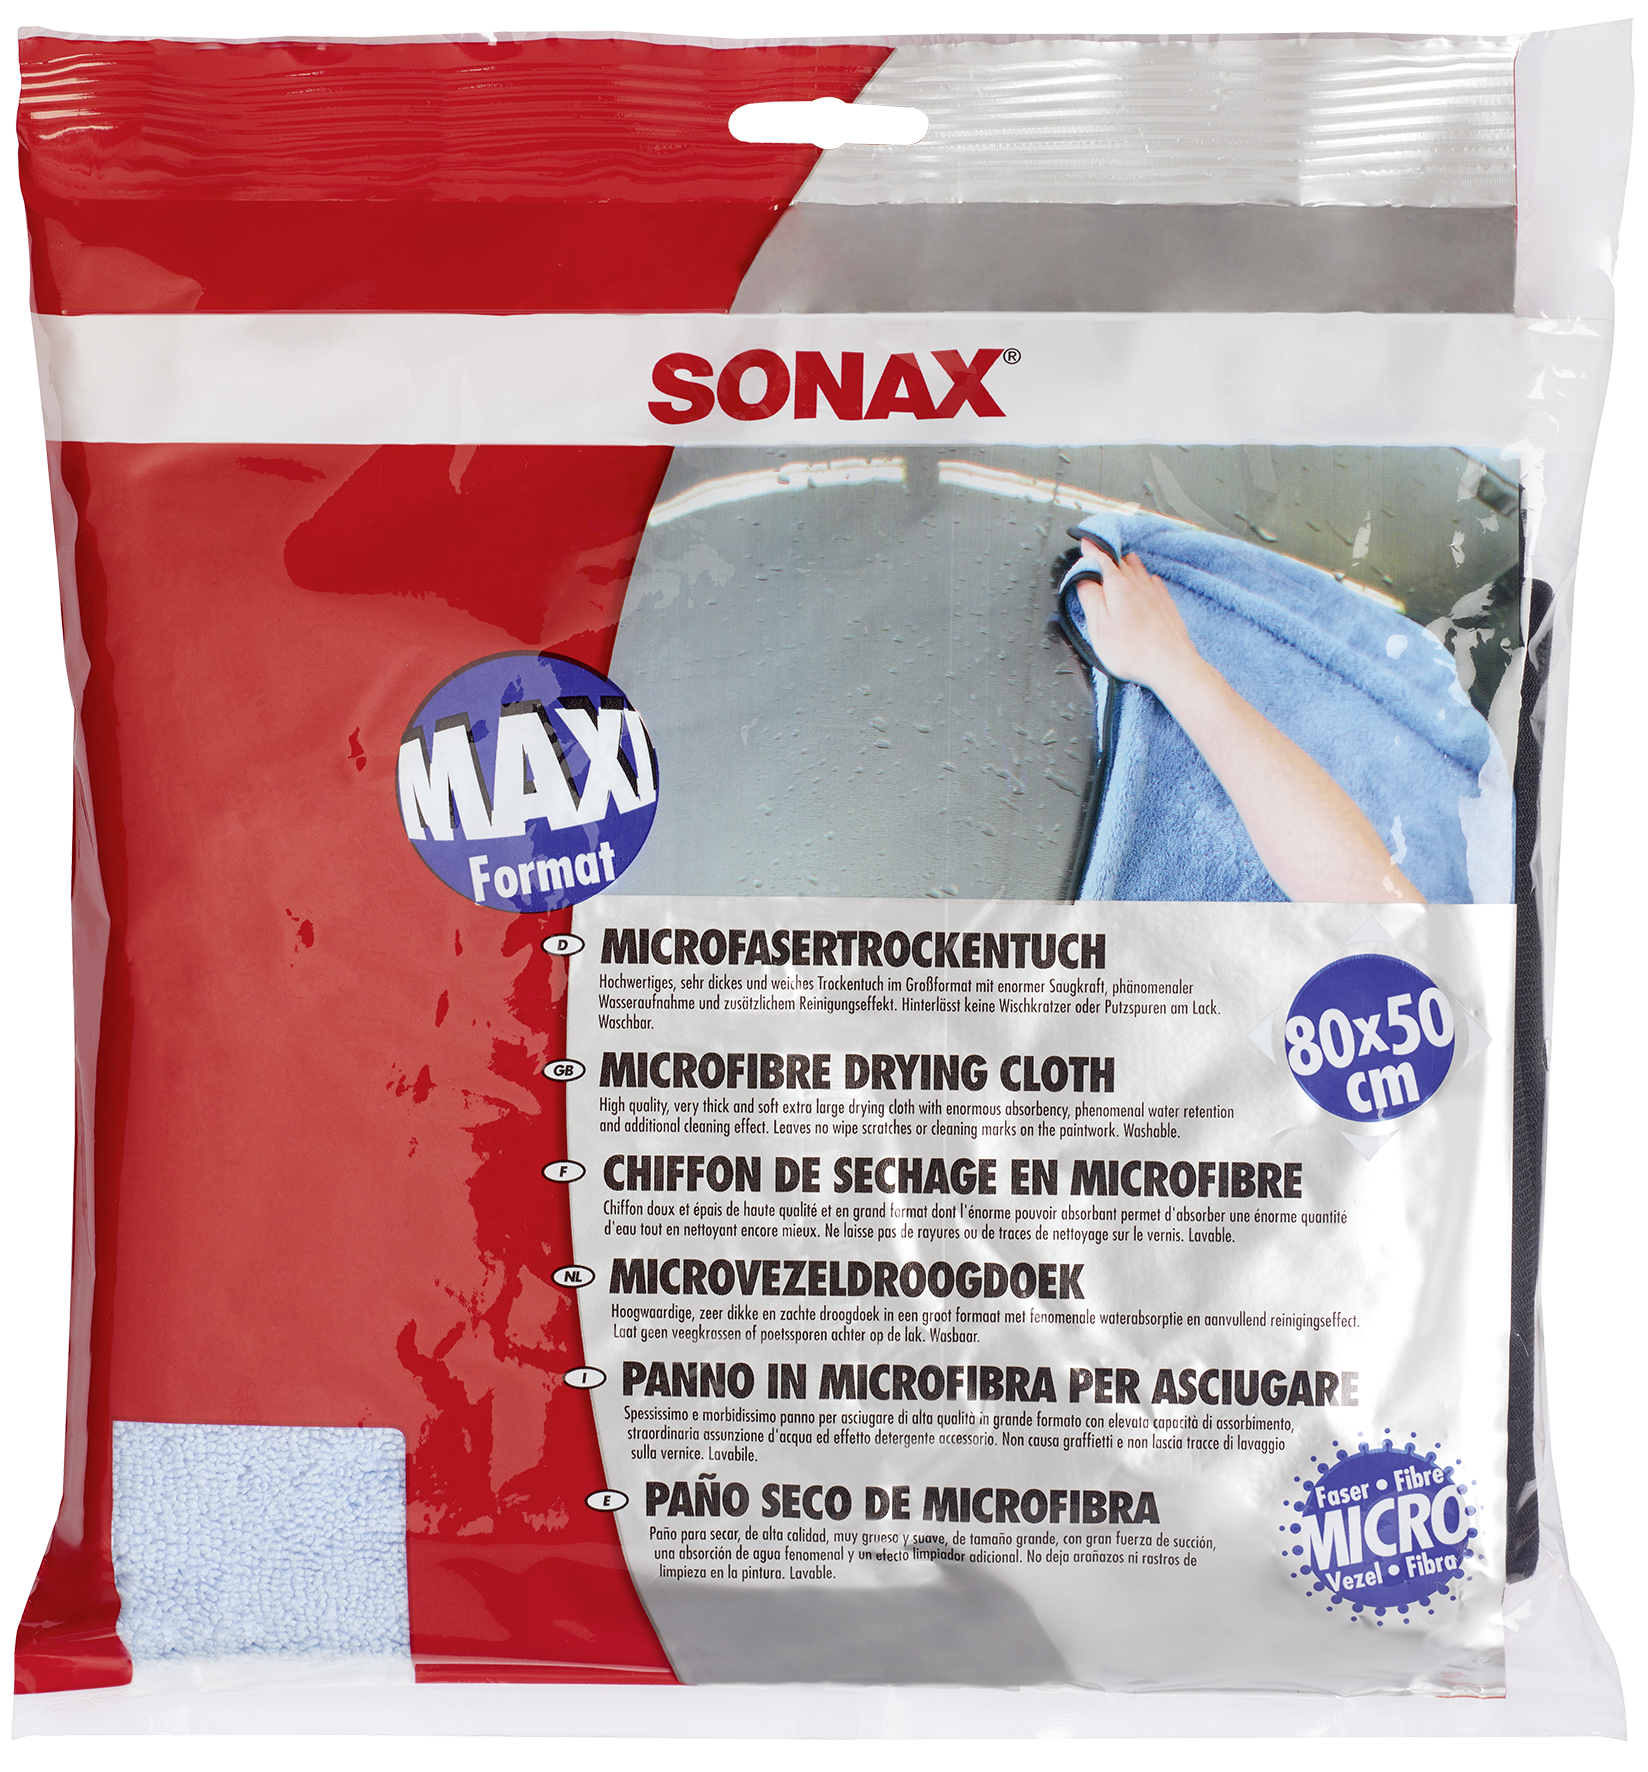 Product image download - SONAX Media - site 6